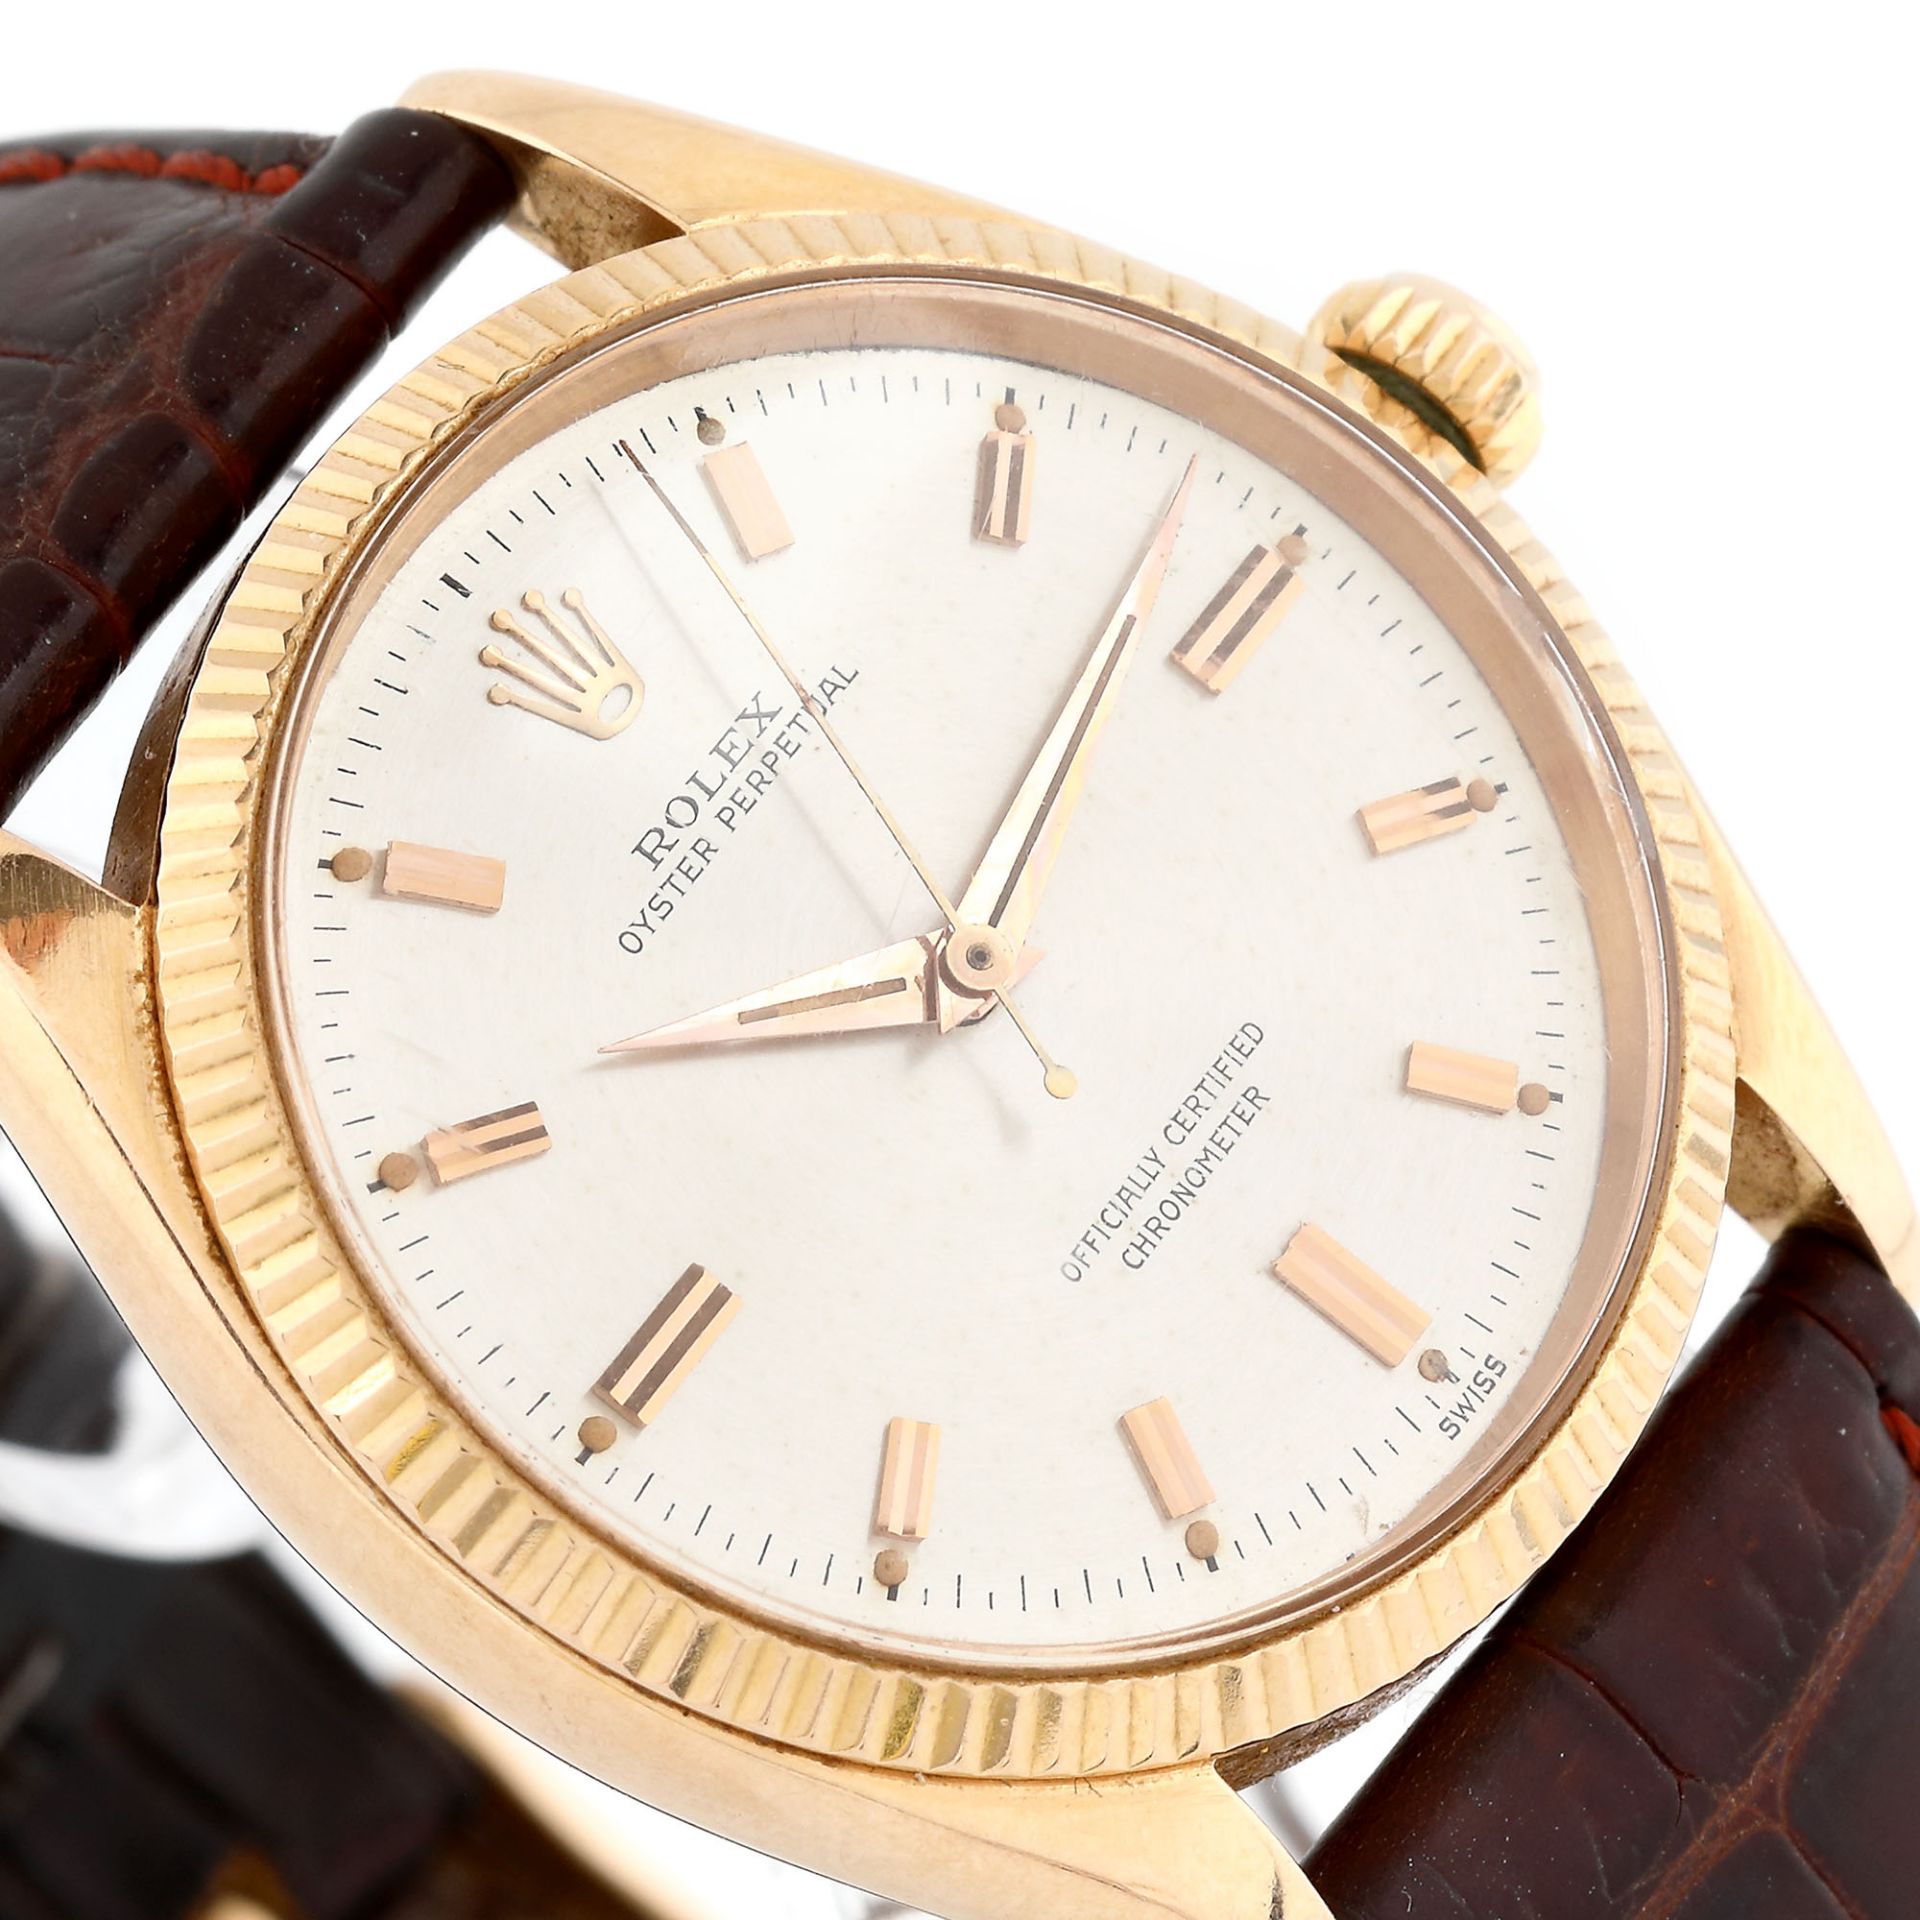 Rolex Oyster Perpetual, wristwatch, rose gold, unisex - Image 2 of 2